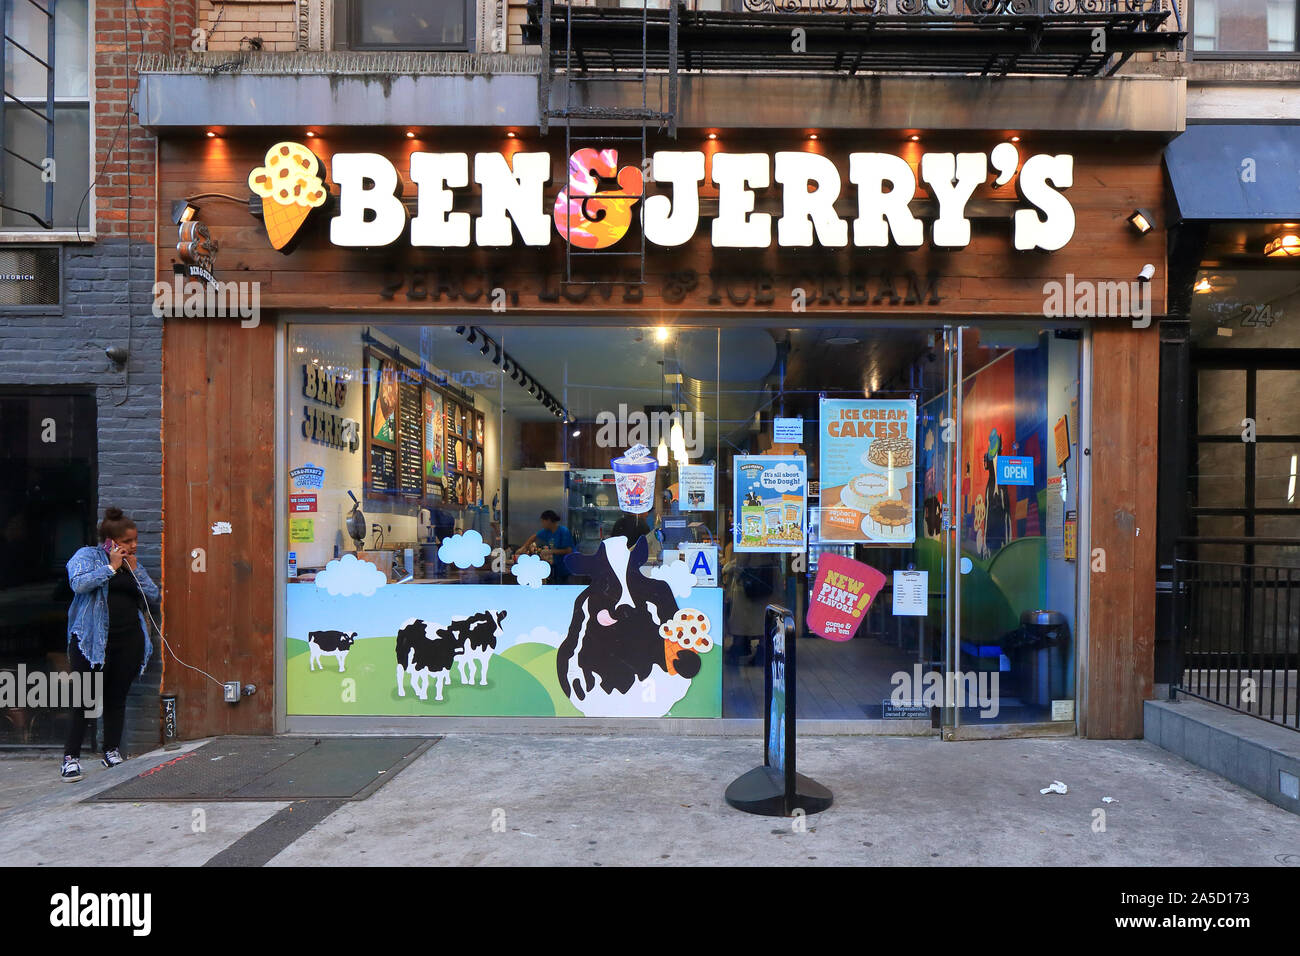 [historical storefront] Ben & Jerry’s, 24 St Marks Place, New York, NY.  exterior storefront of an ice cream shop in the East Village. Stock Photo